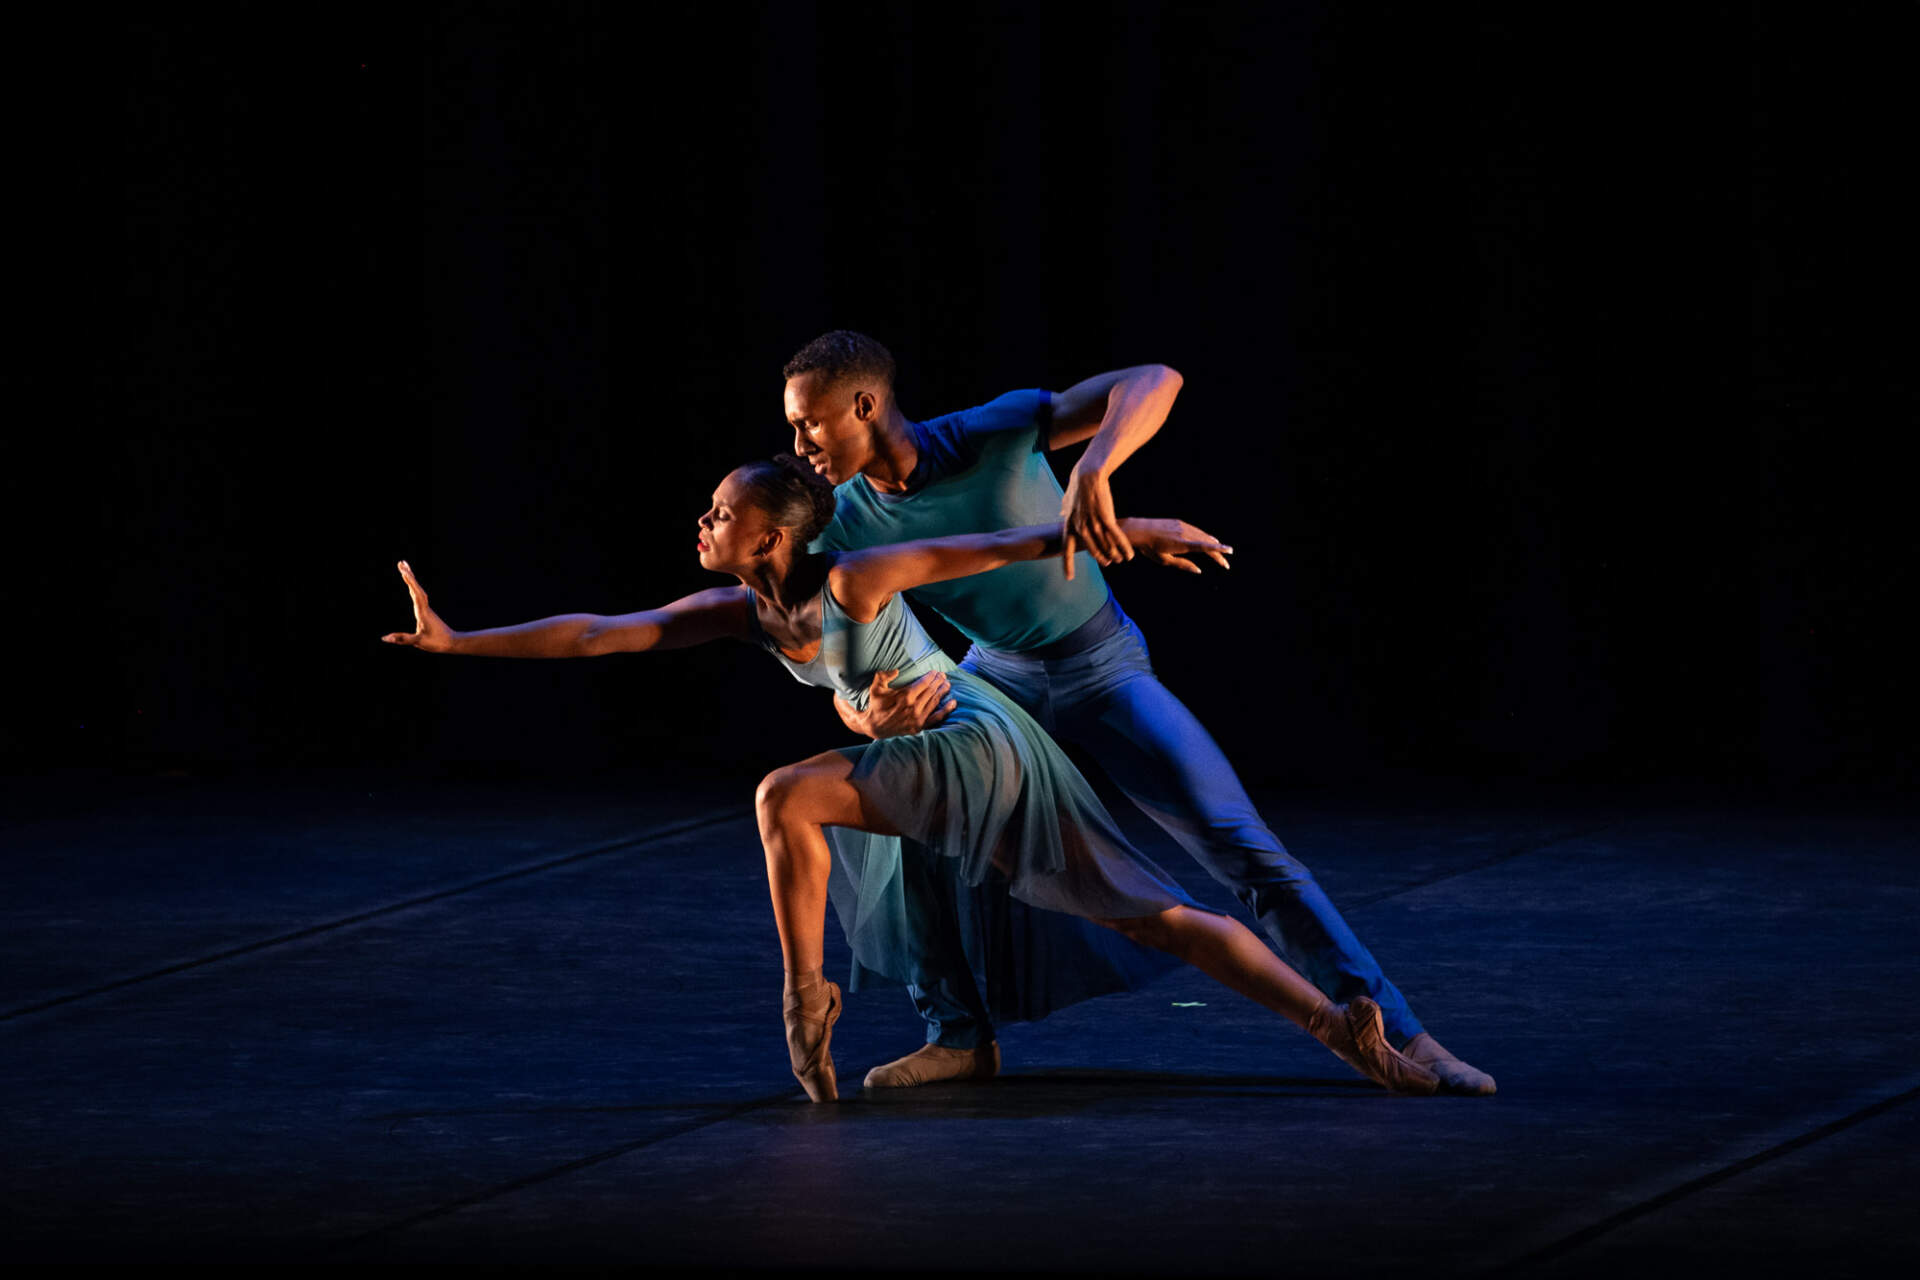 Elias Re and Amanda Smith of Dance Theatre of Harlem performing &quot;This Bitter Earth&quot; by Christopher Wheeldon at the Jacob's Pillow. (Courtesy Cherylynn Tsushima)